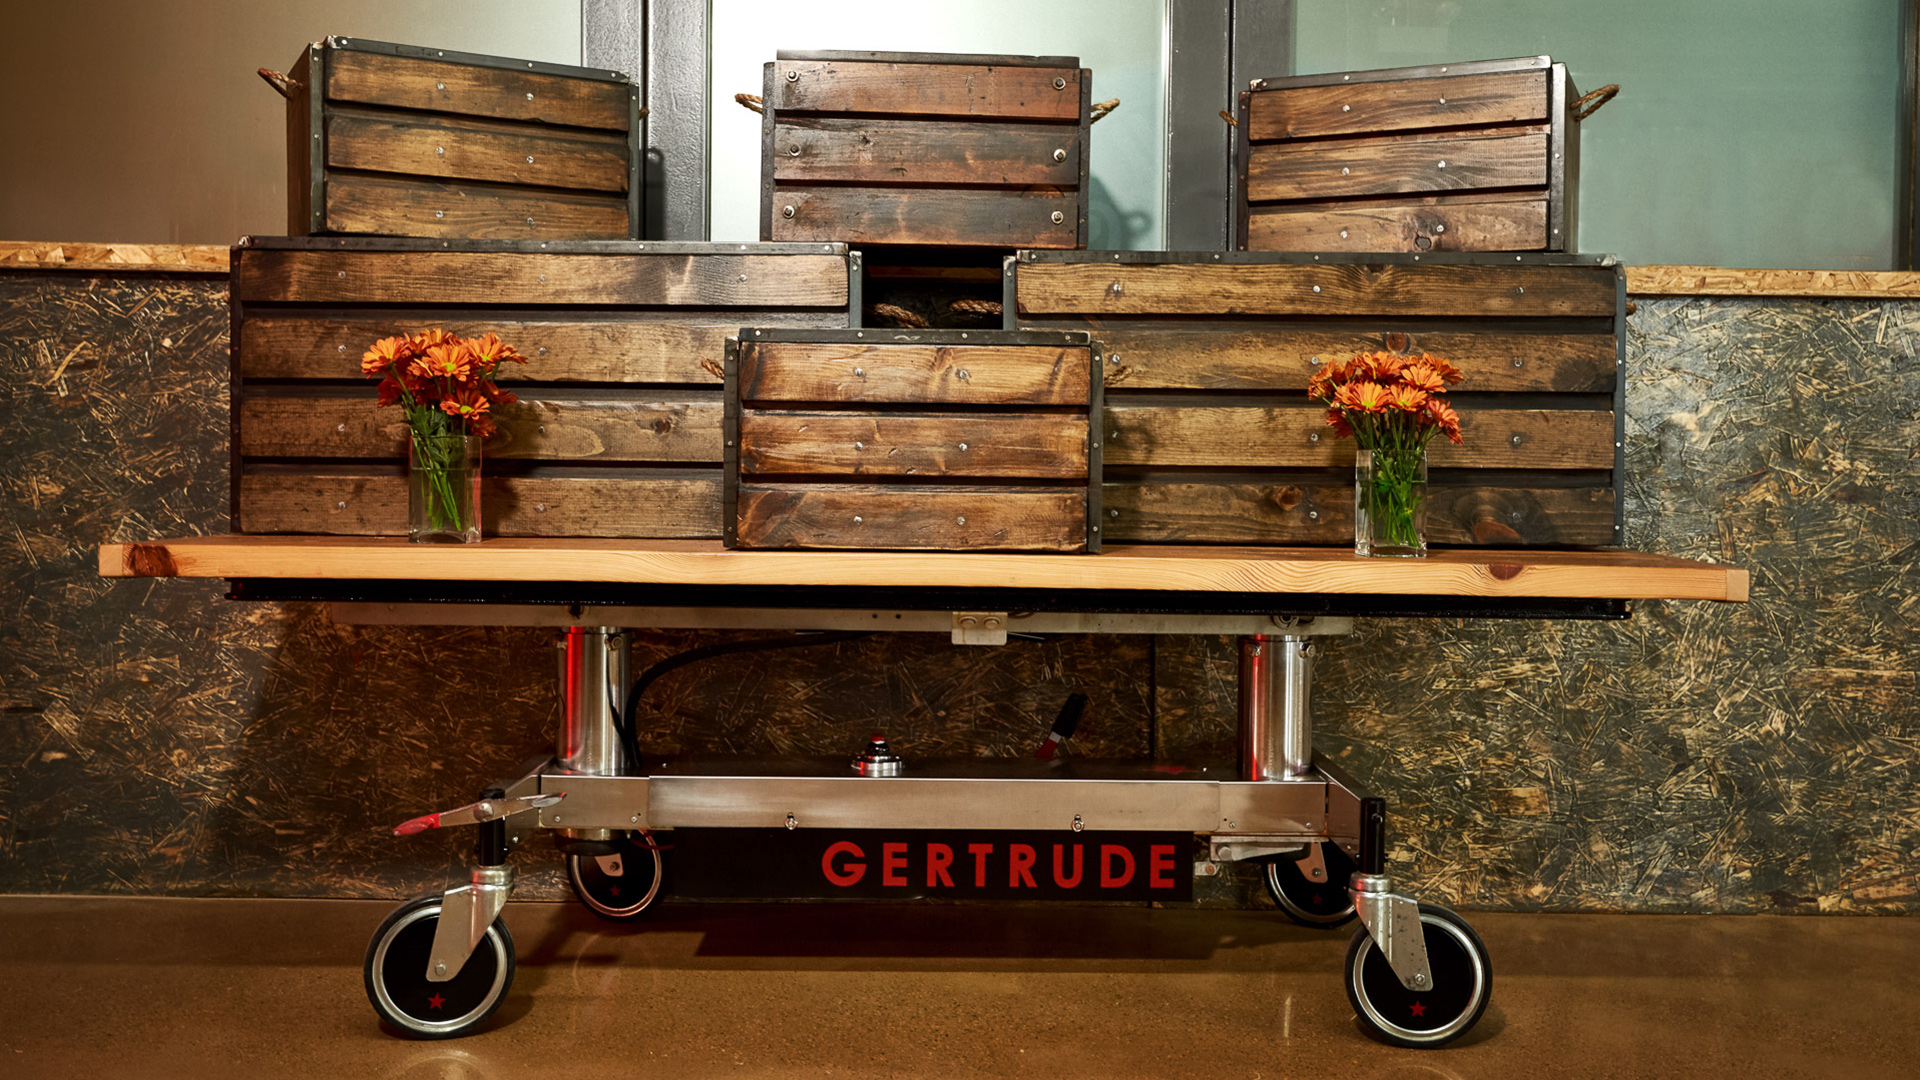 Gertrude, Inc. Reclaimed Branded Gurney with Handmade Crates Display